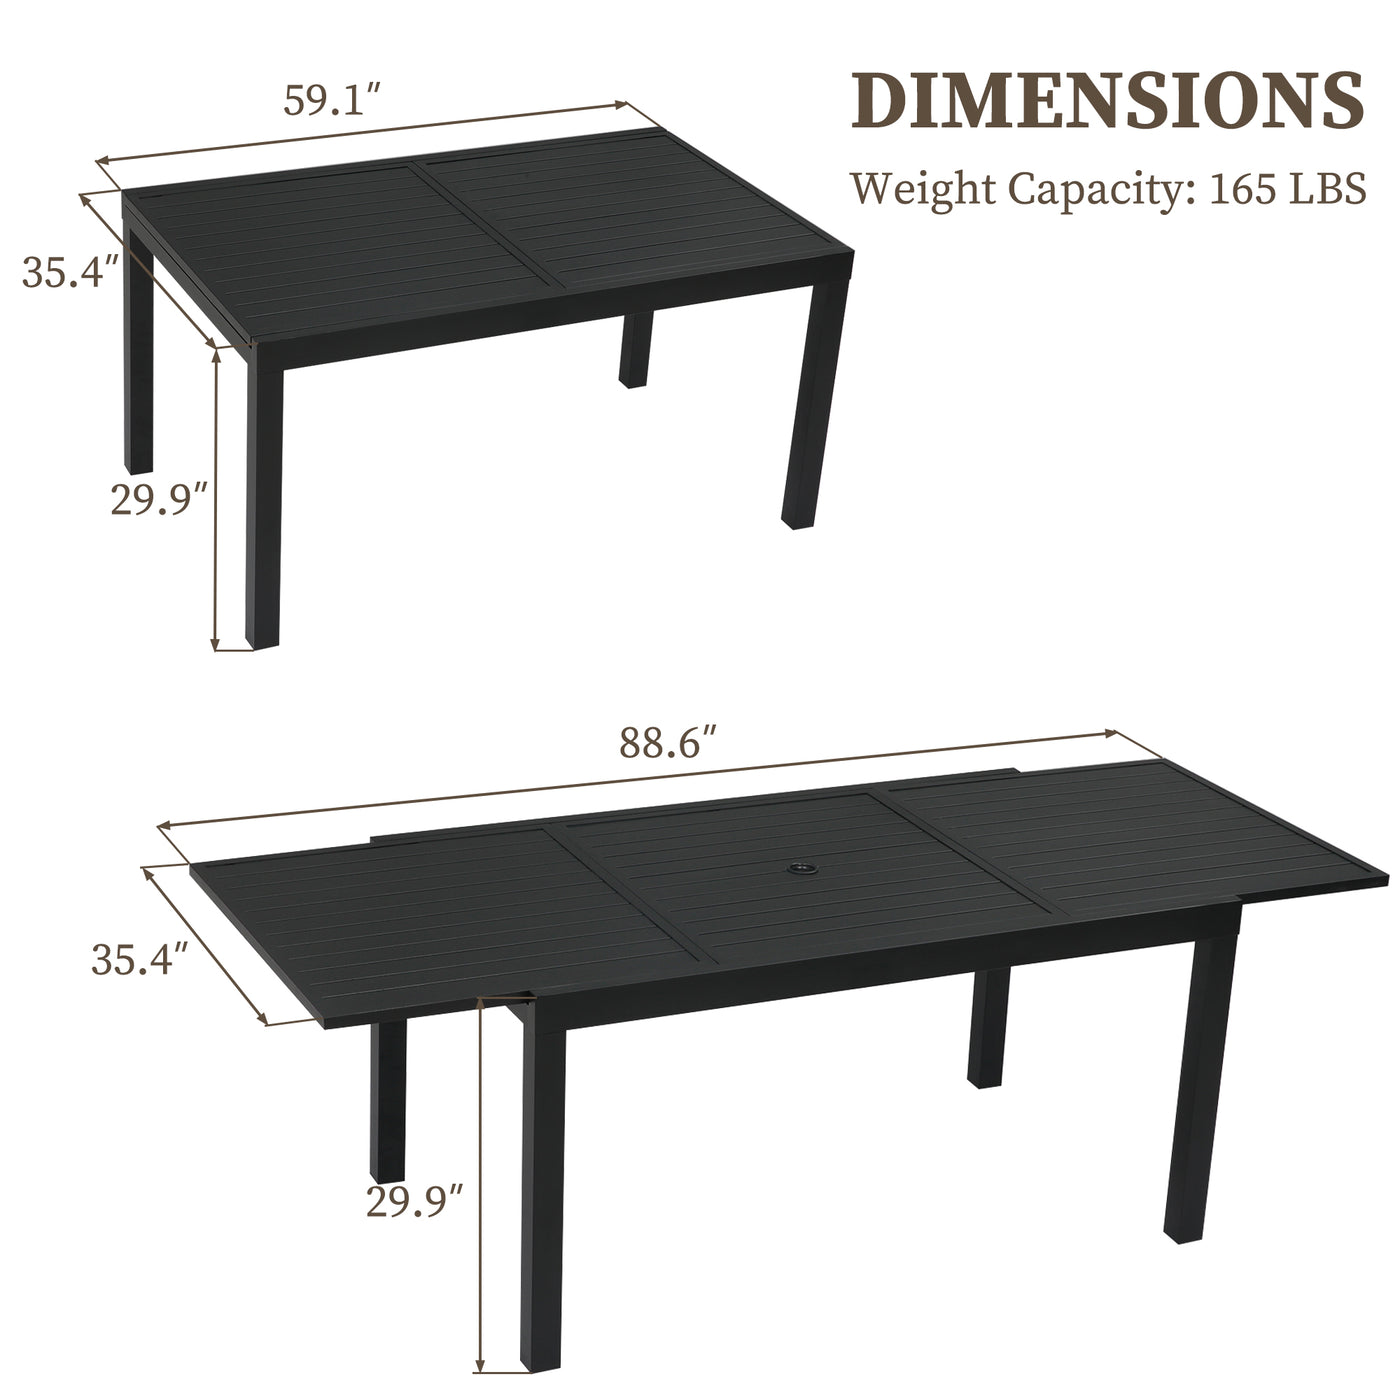 Illustration of a Pizzello Aluminum Patio Extendable Dining Table displaying two configurations with dimensions and a weight capacity of 165 lbs.